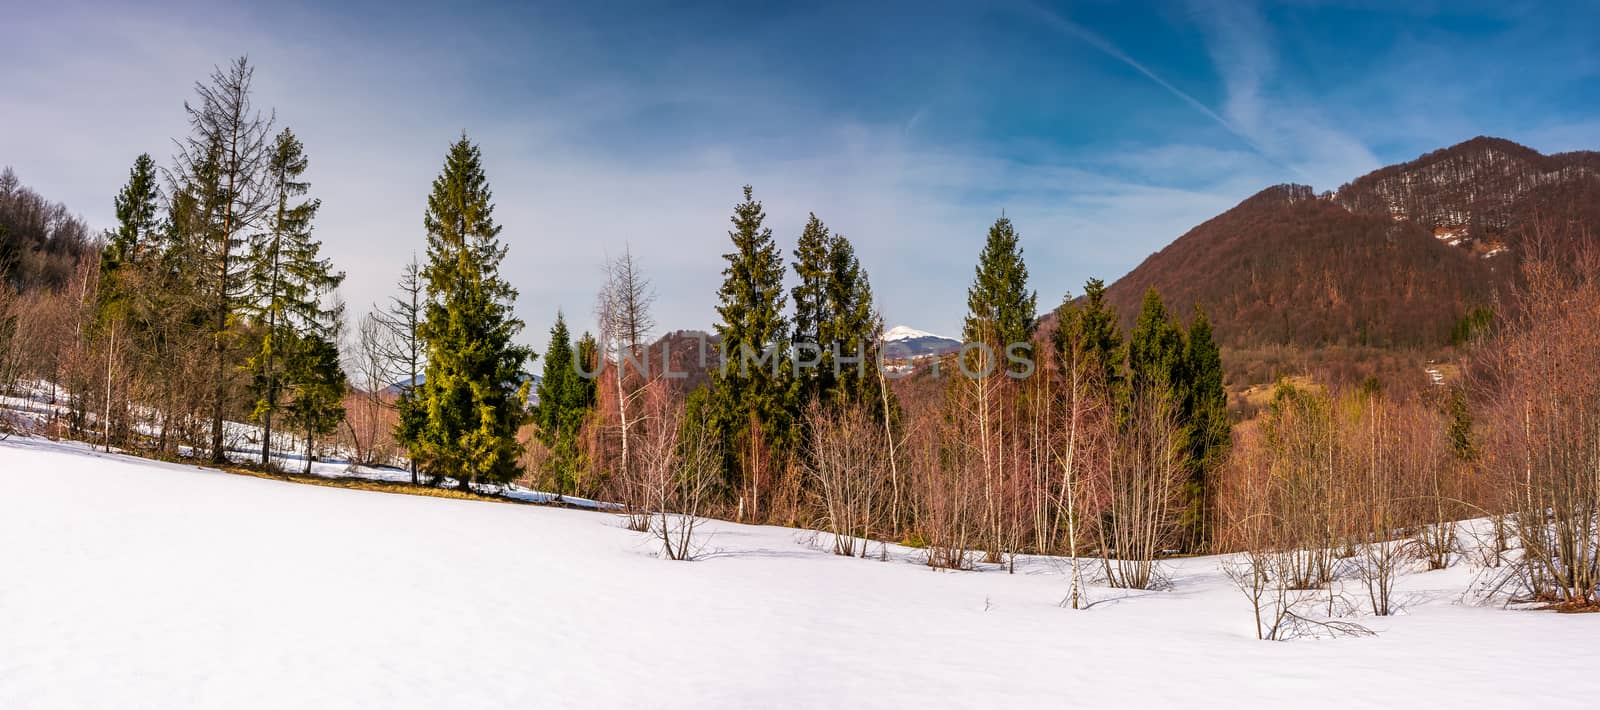 snowy slope with forest in springtime by Pellinni